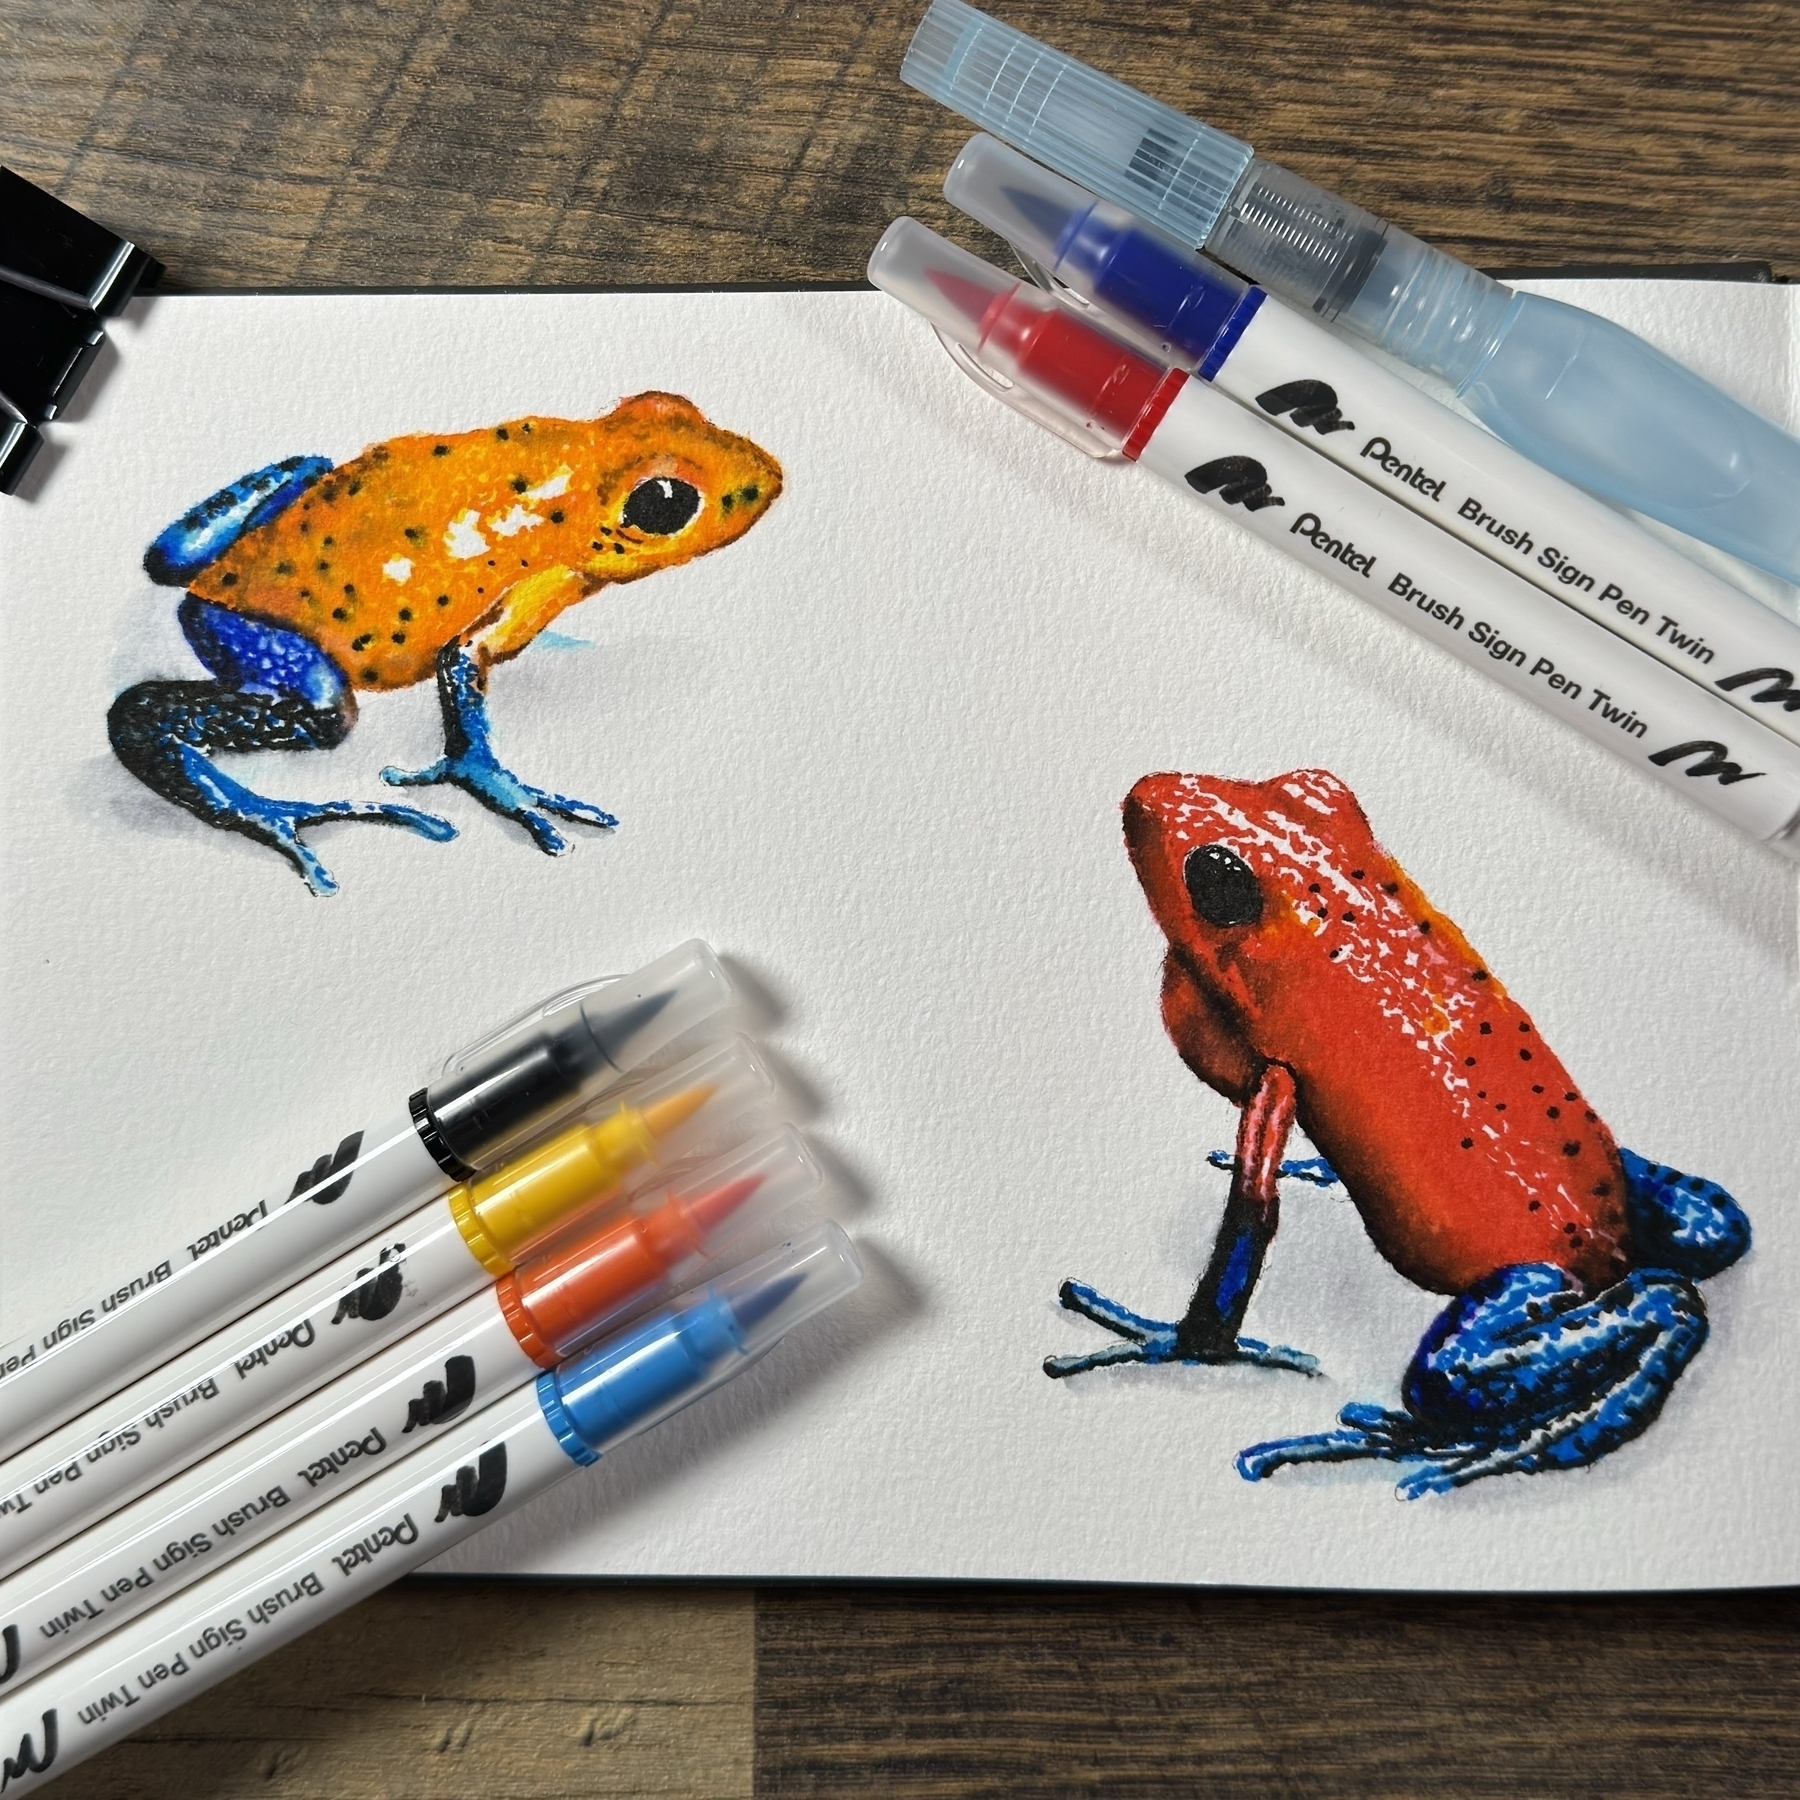 An image of two vibrantly colored frog illustrations on a textured paper. The top frog is painted in bright orange with blue legs and black spots, while the bottom frog is in vivid red with blue details and black spots. Both are surrounded by a selection of Brush Sign Pen Twin markers in coordinating colors, and a medium-sized Pentel Aquash Water Brush lies next to them. The artwork and tools rest on a dark wooden surface, indicating a creative, artistic setting.